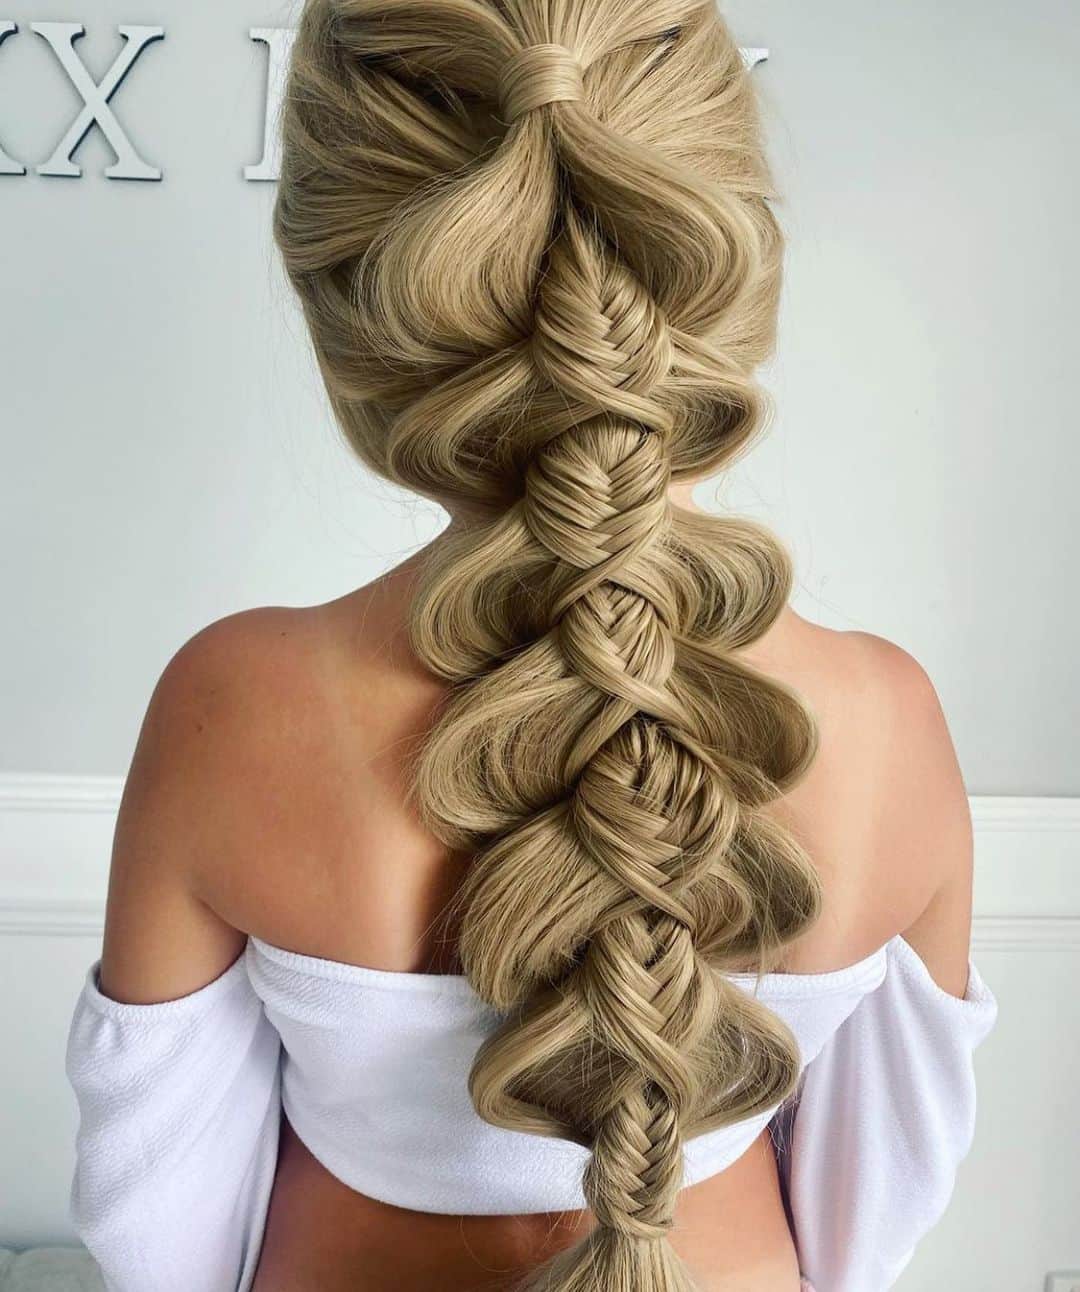 I N S T A B R A I Dのインスタグラム：「Haven’t been on here in foreverrrrr!! It’s been a crazy few months- Missed you guys 💕🥺 how stunning is this braid?!」